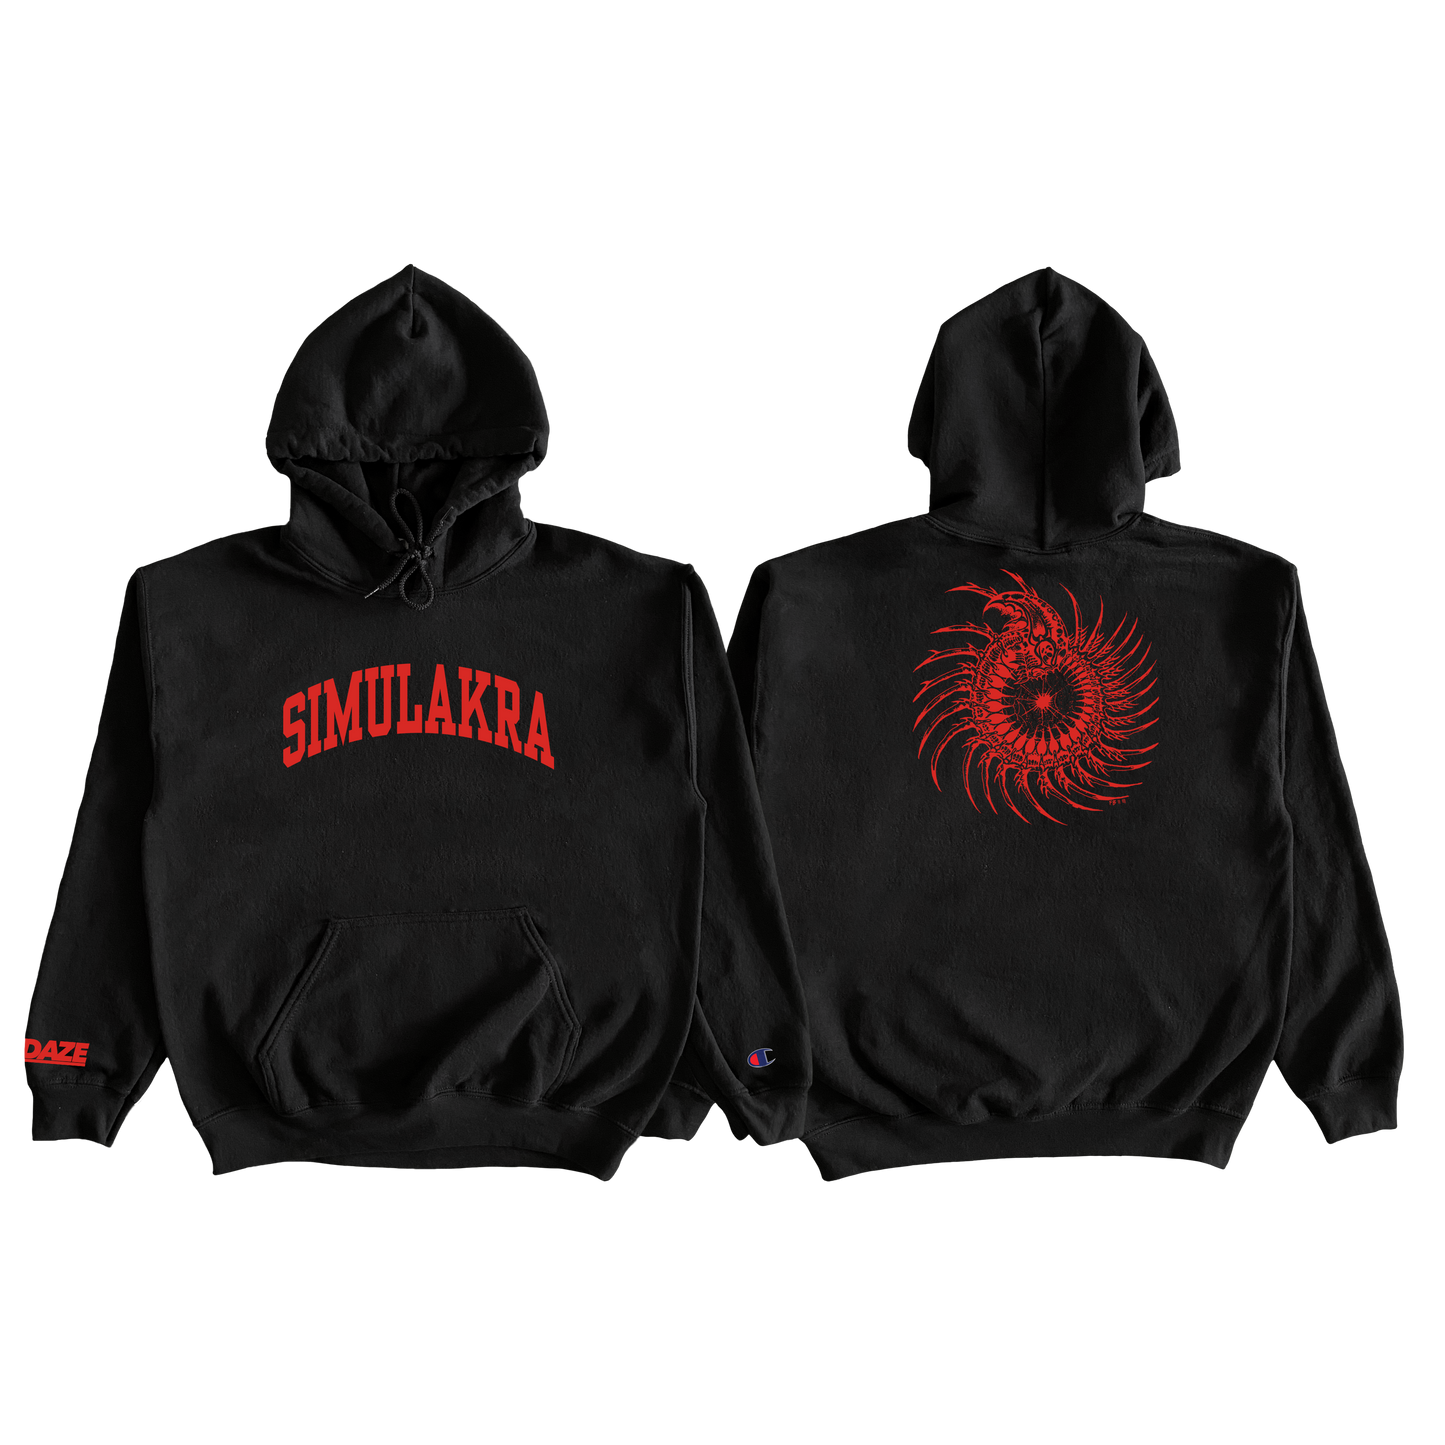 Simulakra - Arched Logo Champion Hoodie